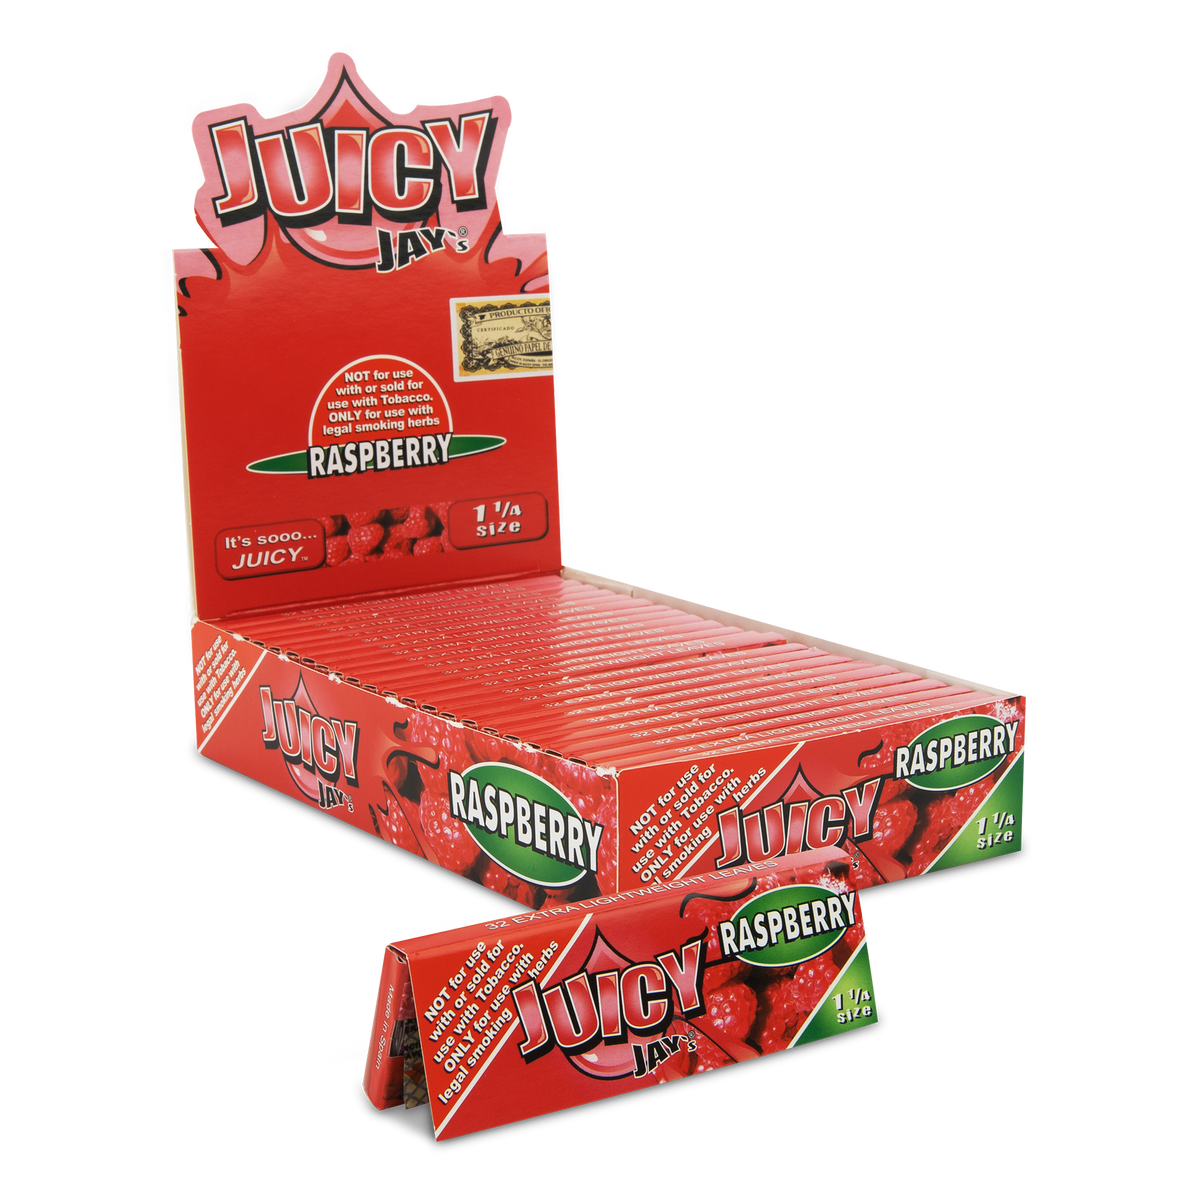 Juicy Jays 1 1/4 Raspberry Flavored Hemp Rolling Papers Rolling Papers esd-official